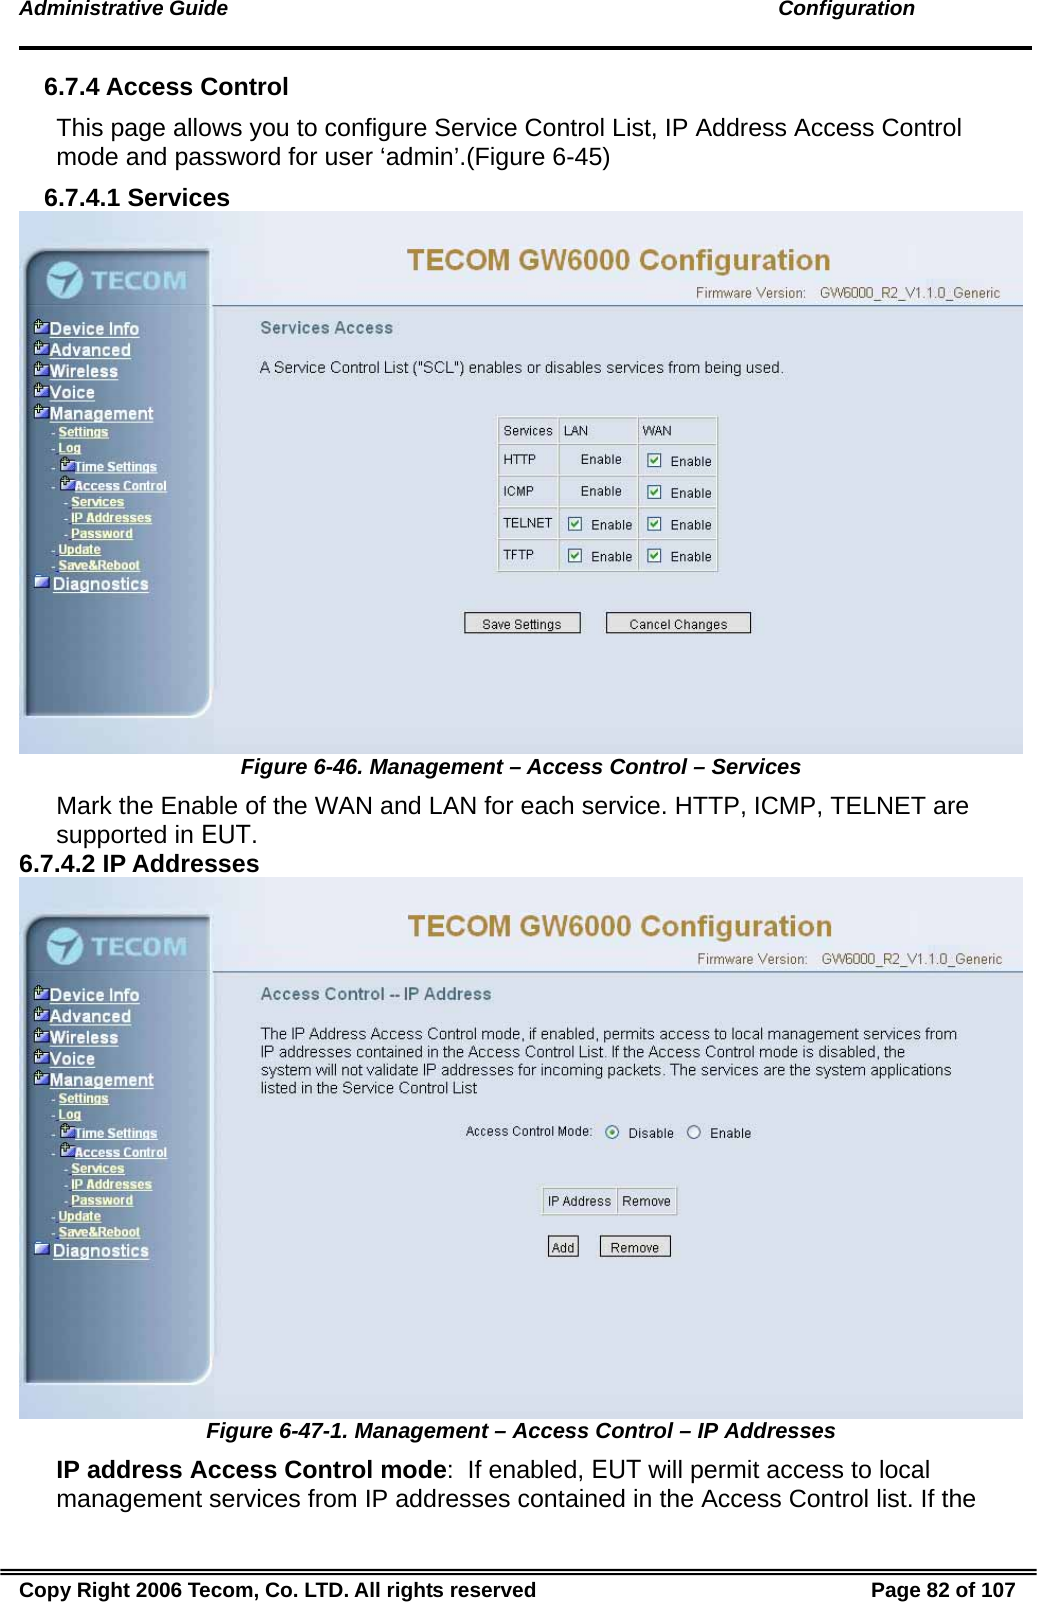 Administrative Guide                                                                                               Configuration 6.7.4 Access Control This page allows you to configure Service Control List, IP Address Access Control mode and password for user ‘admin’.(Figure 6-45) 6.7.4.1 Services  Figure 6-46. Management – Access Control – Services Mark the Enable of the WAN and LAN for each service. HTTP, ICMP, TELNET are supported in EUT. 6.7.4.2 IP Addresses  Figure 6-47-1. Management – Access Control – IP Addresses IP address Access Control mode:  If enabled, EUT will permit access to local management services from IP addresses contained in the Access Control list. If the Copy Right 2006 Tecom, Co. LTD. All rights reserved  Page 82 of 107 